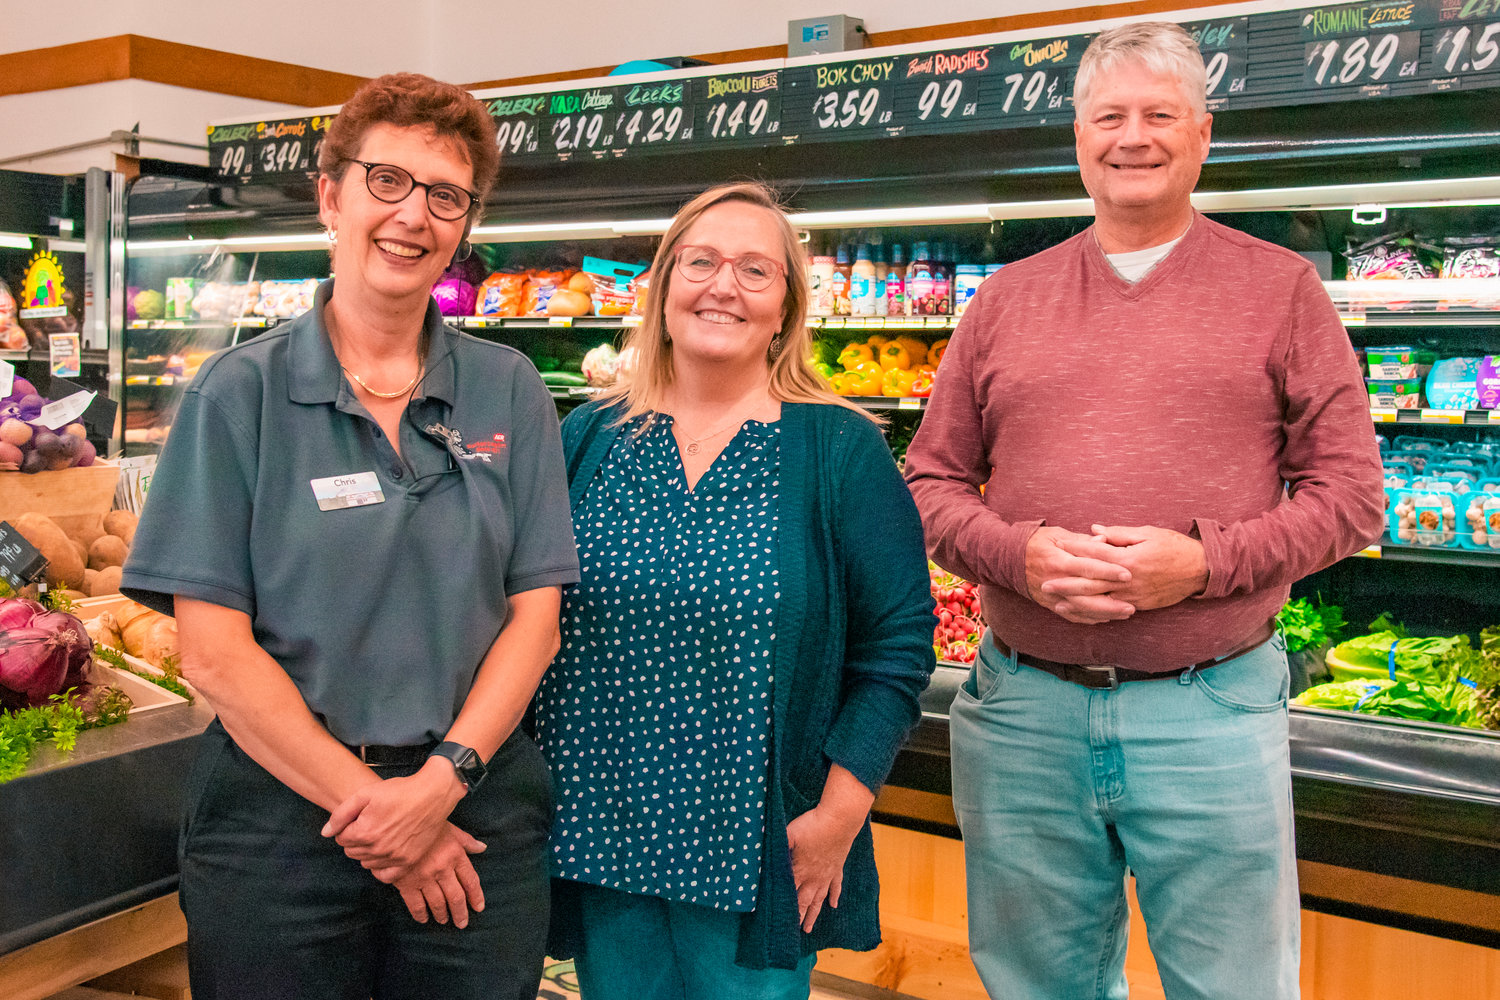 Store Director Chris Falk, Northwest Supermarkets Vice President Linda Marcott and former owner Hal Blanton smile and pose for a photo inside Blanton's Market Wednesday in Packwood.